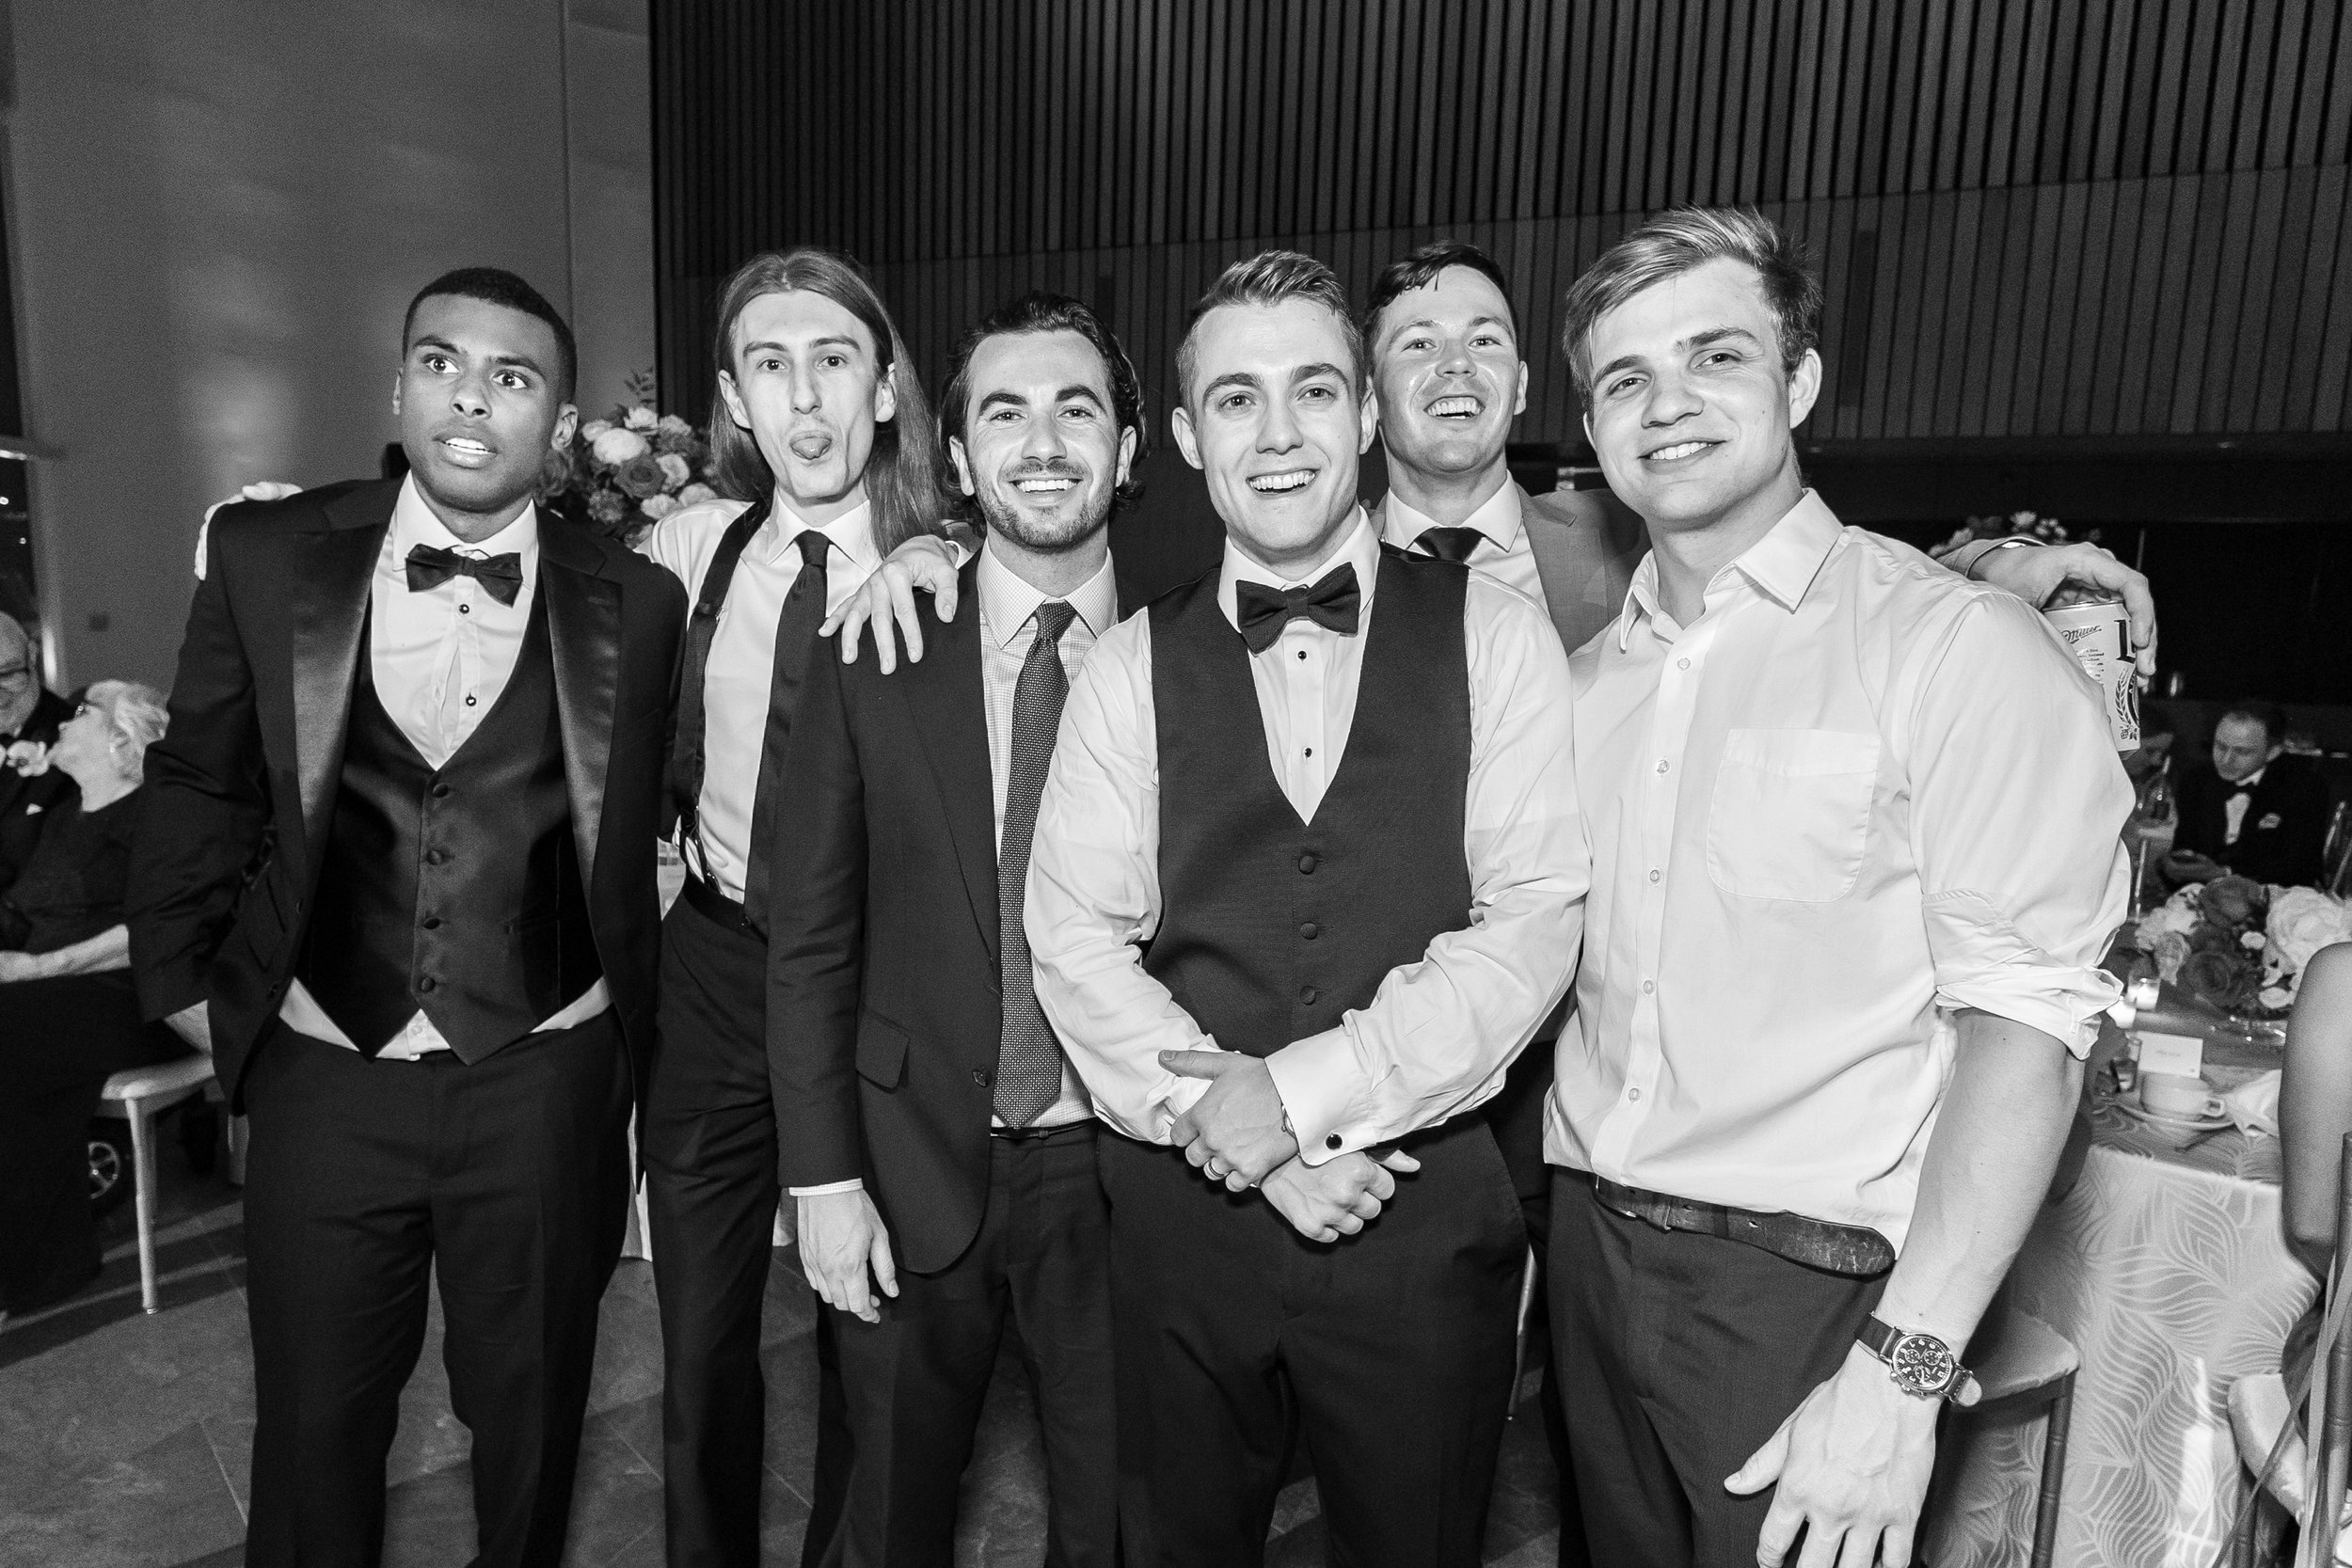 Groom and his friends pose for cool black and white portraits on the dance floor